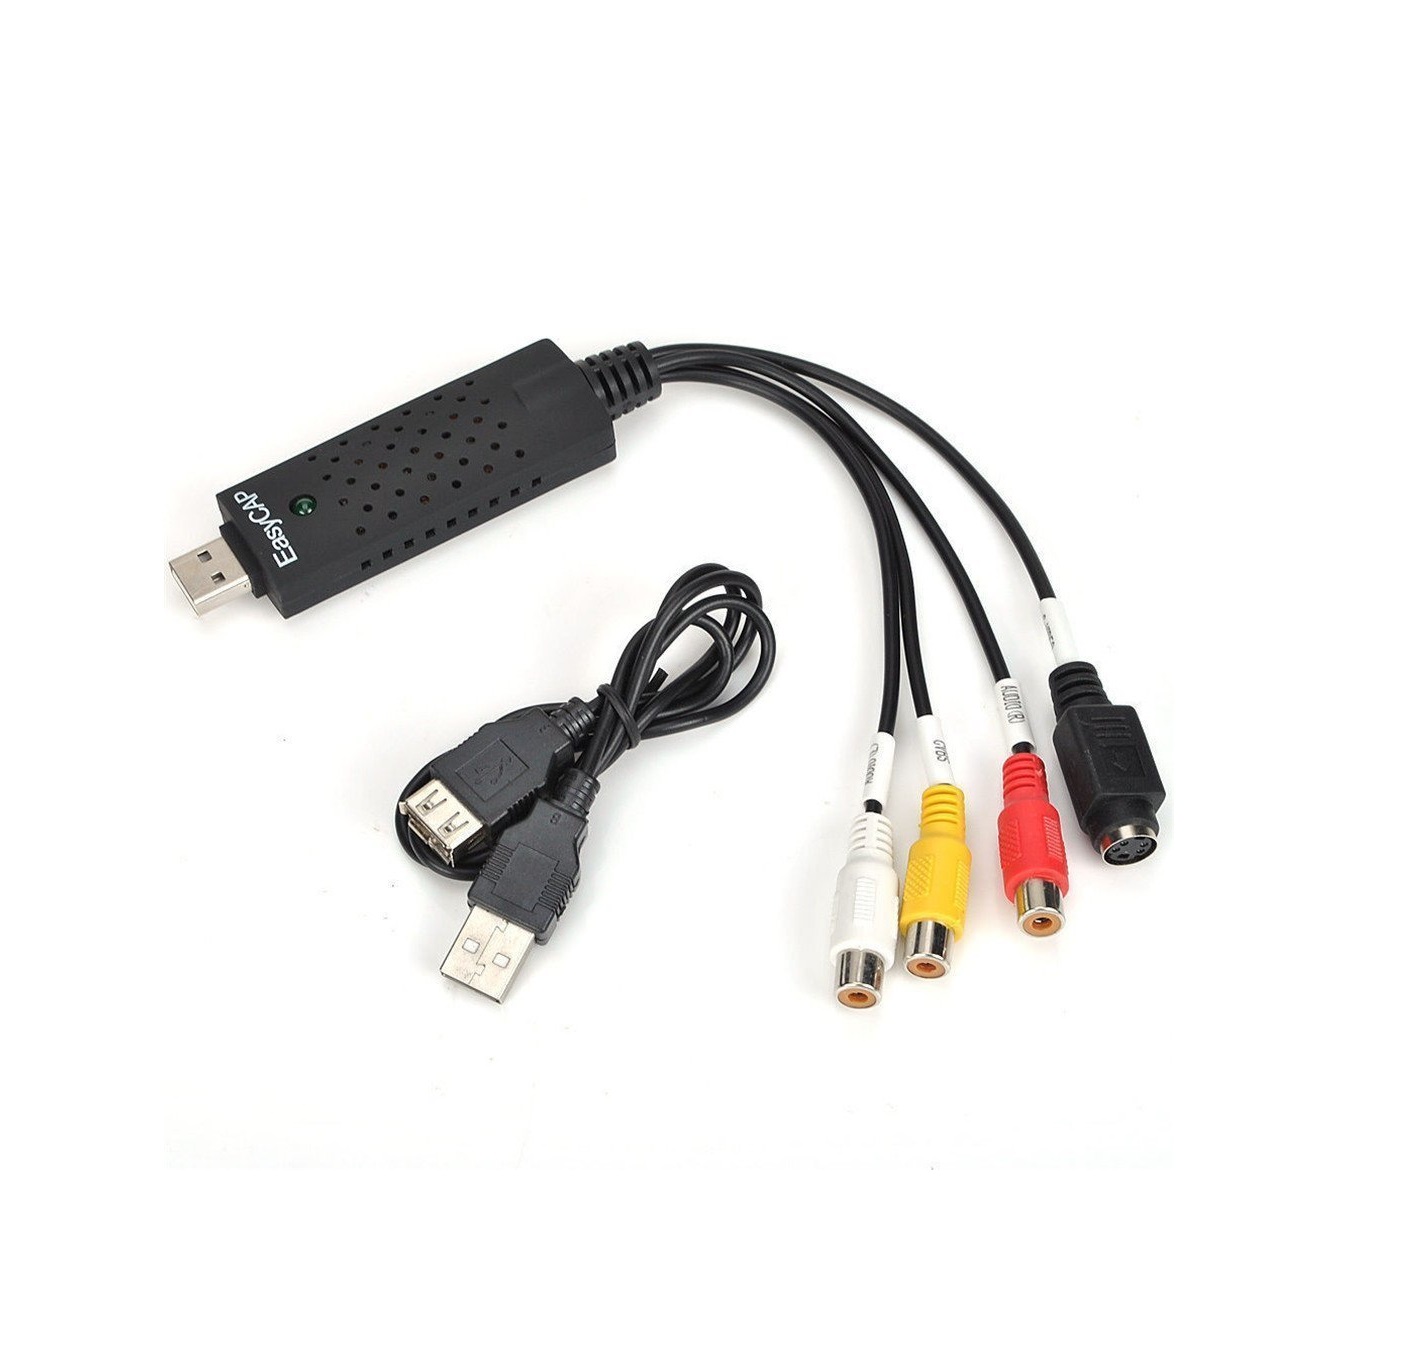 EasyCapture USB Audio and Video Capture Card